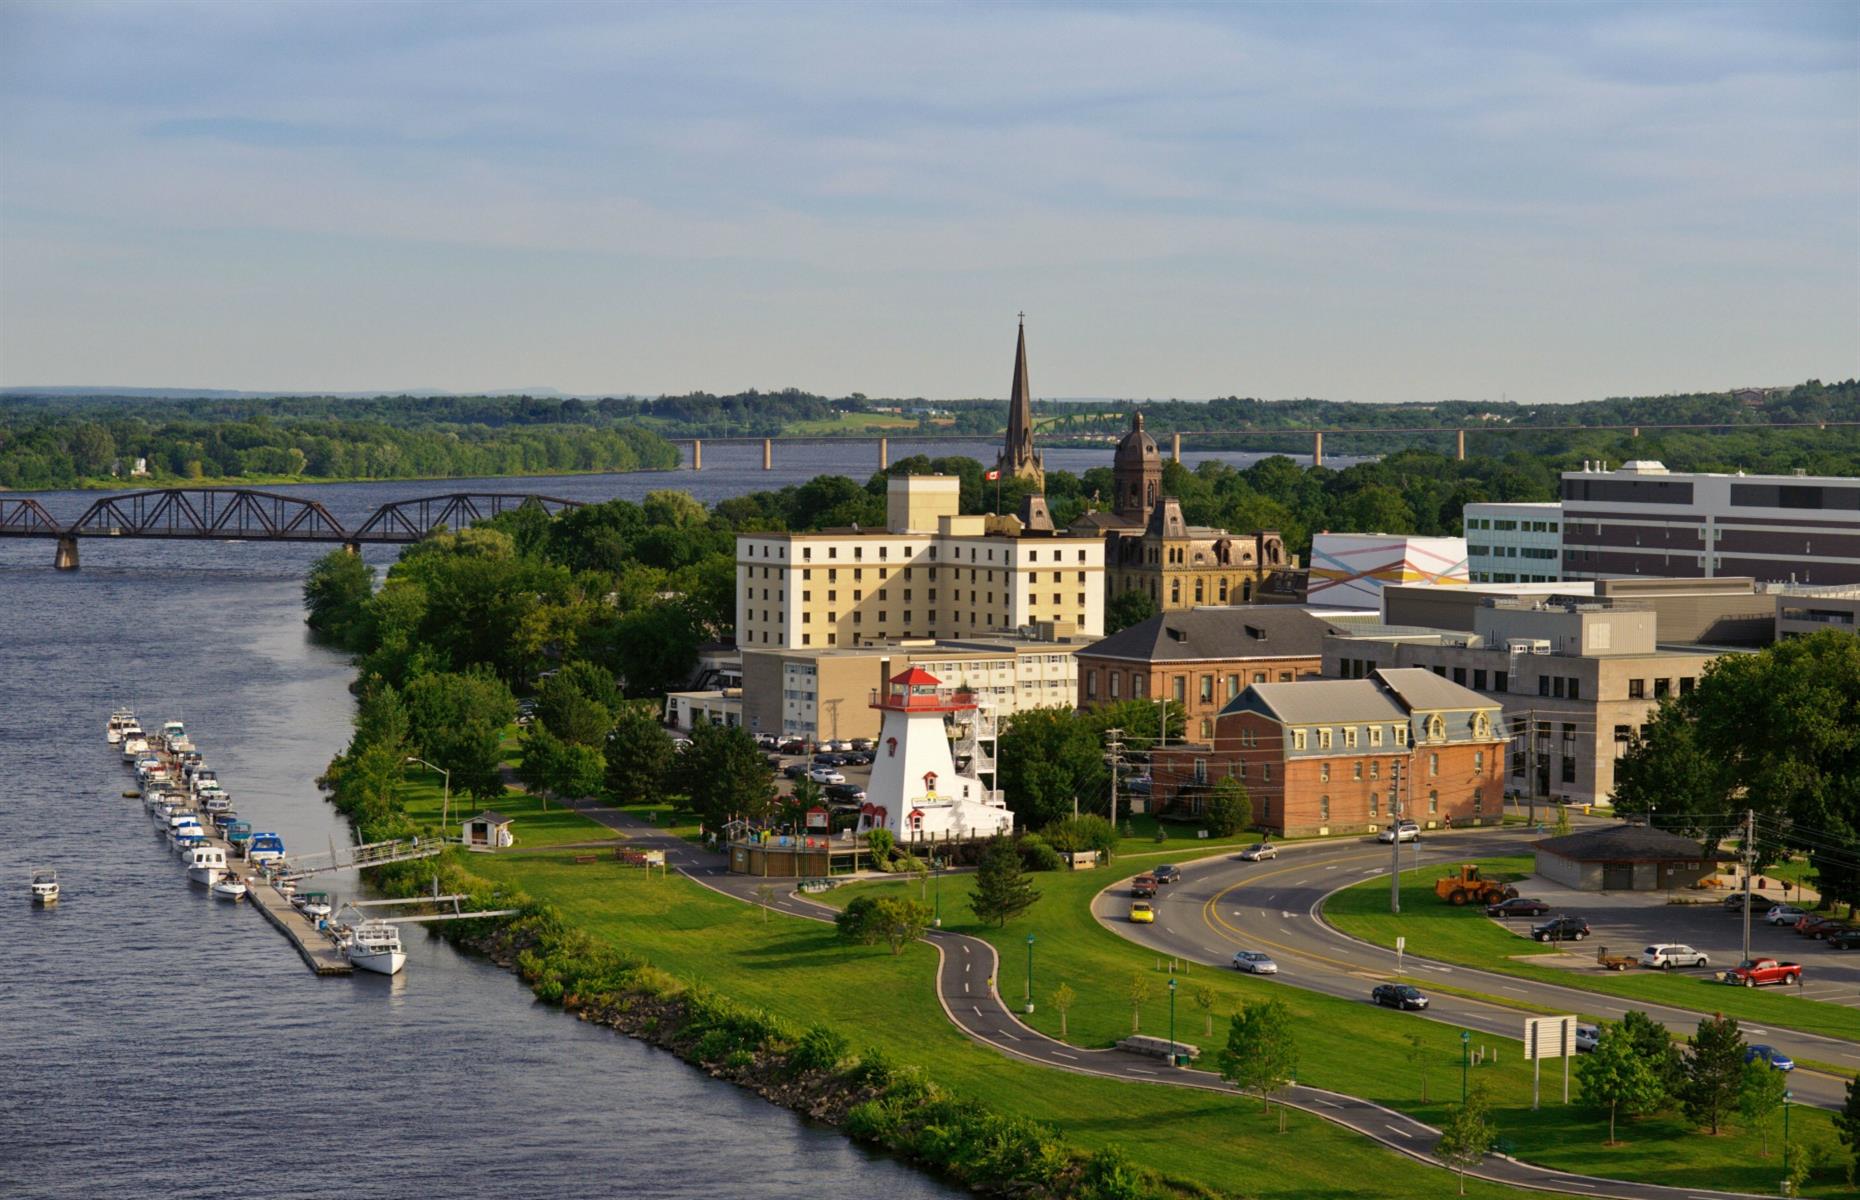 New Brunswick may just be Canada’s most underrated province. Its capital, Fredericton, is relatively small and uber-friendly and it's also the heart of New Brunswick’s artistic community. Here, you’ll find the New Brunswick College of Craft and Design, the Beaverbrook Art Gallery and the annual Harvest Jazz & Blues Festival.